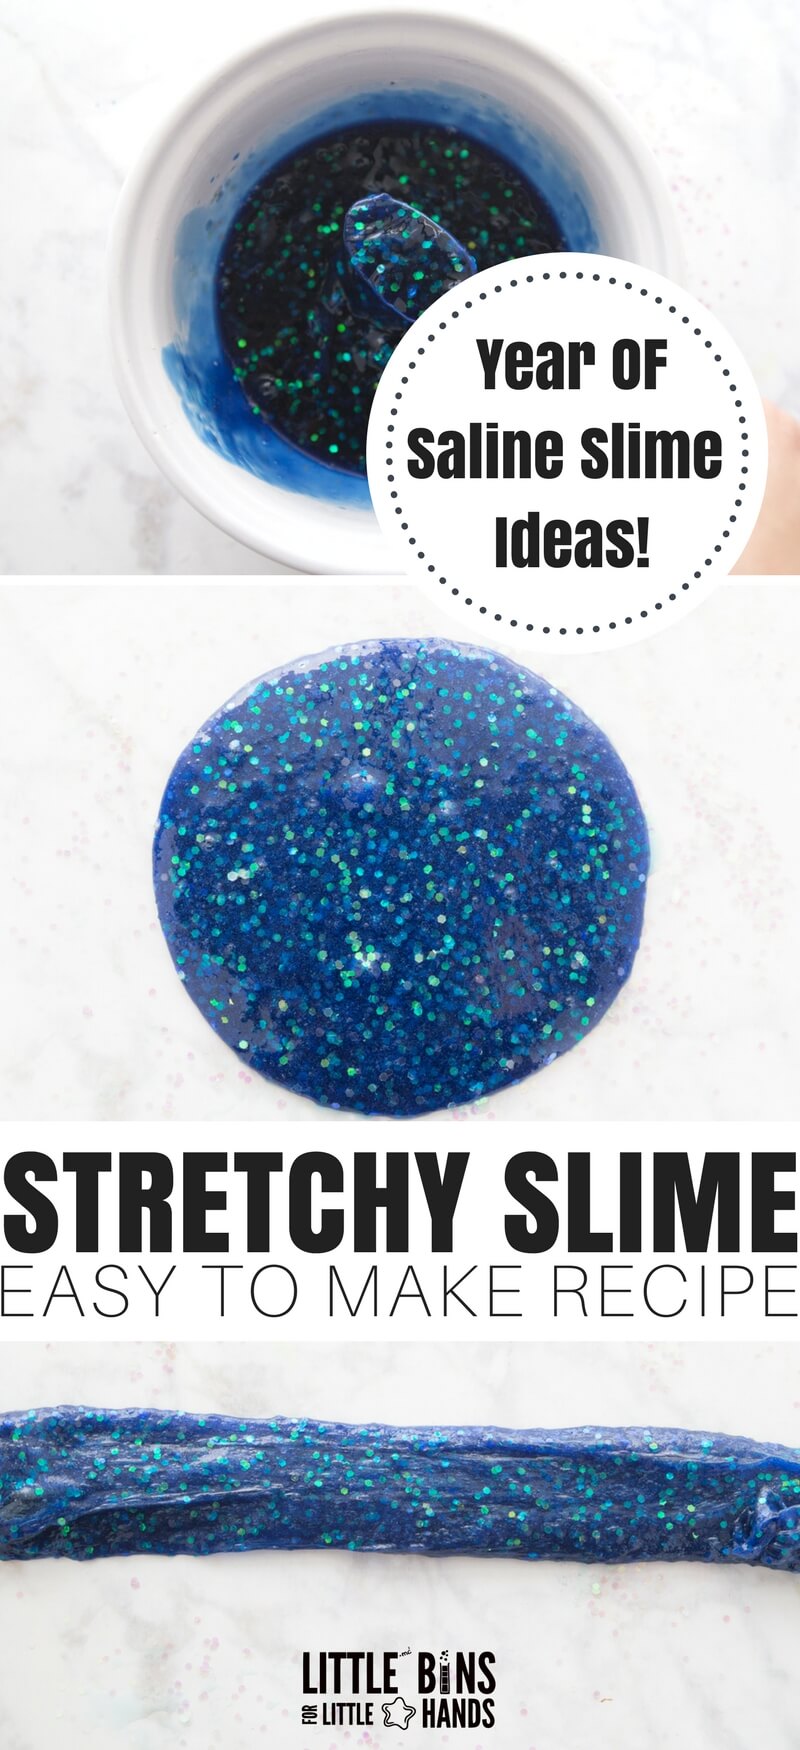 Learn how to make homemade slime with saline solution for a super easy slime recipe that is amazingly stretchy. Making homemade slime is easy when you use our best slime recipes the kids love!